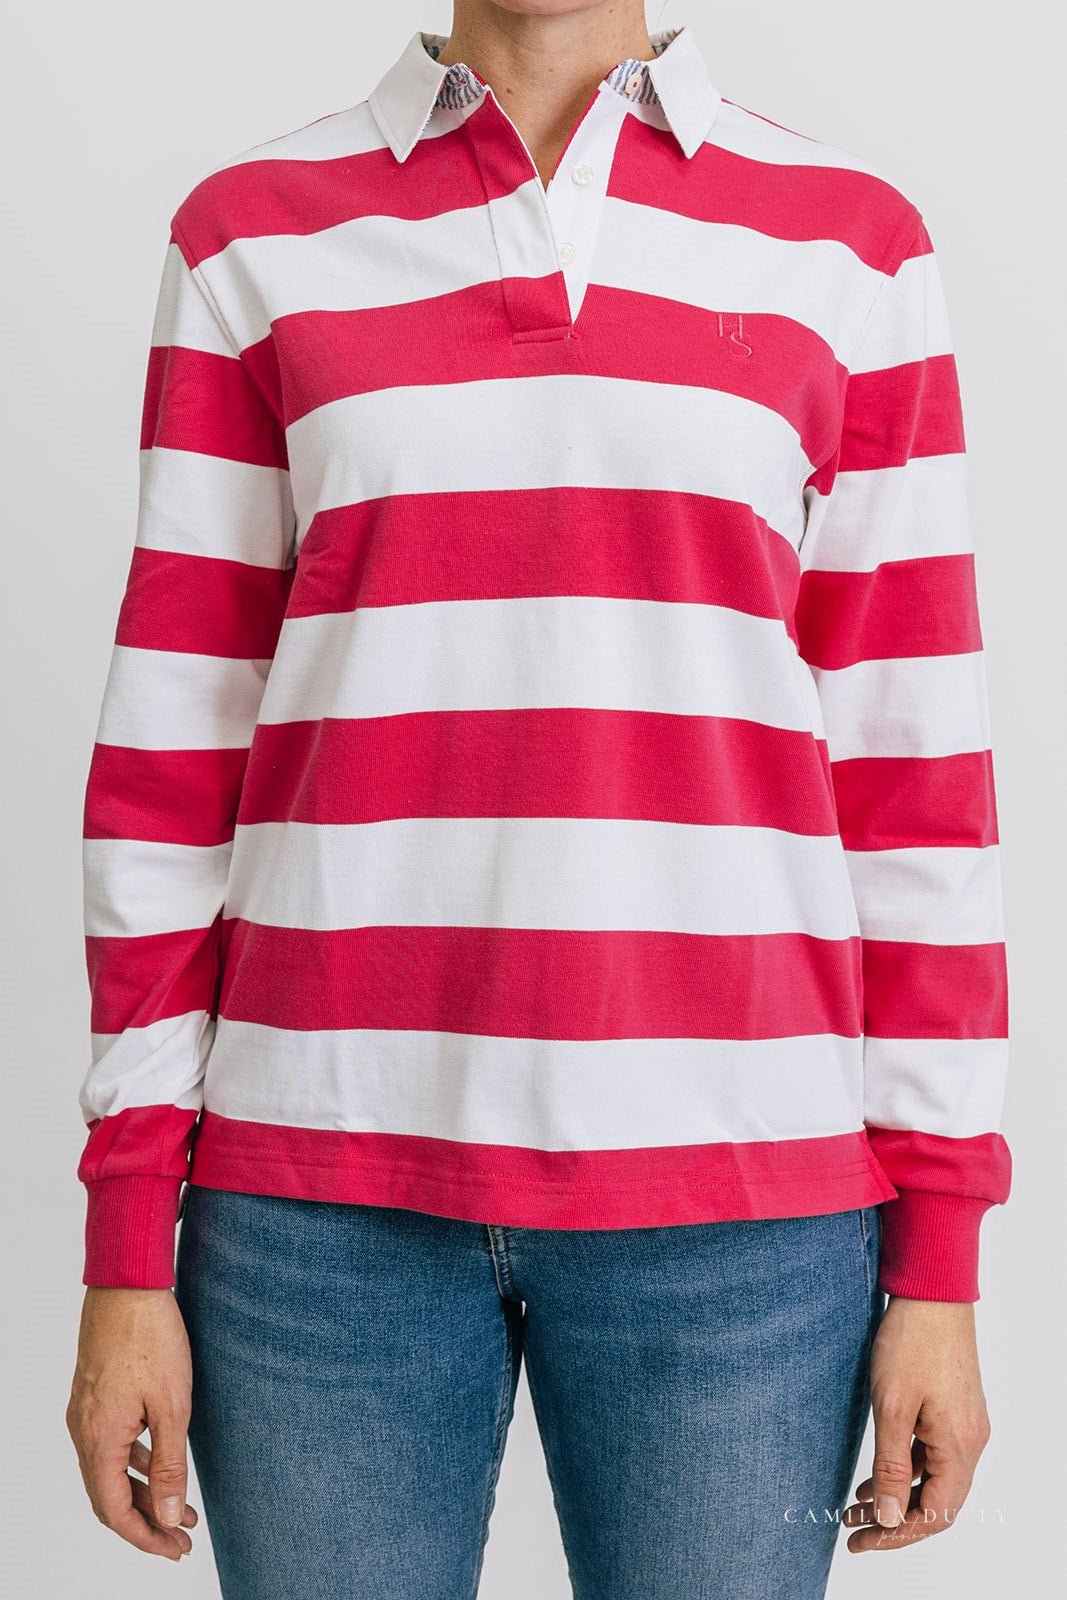 Lucy Rugby in Pink and White Stripe - H&S Heritage